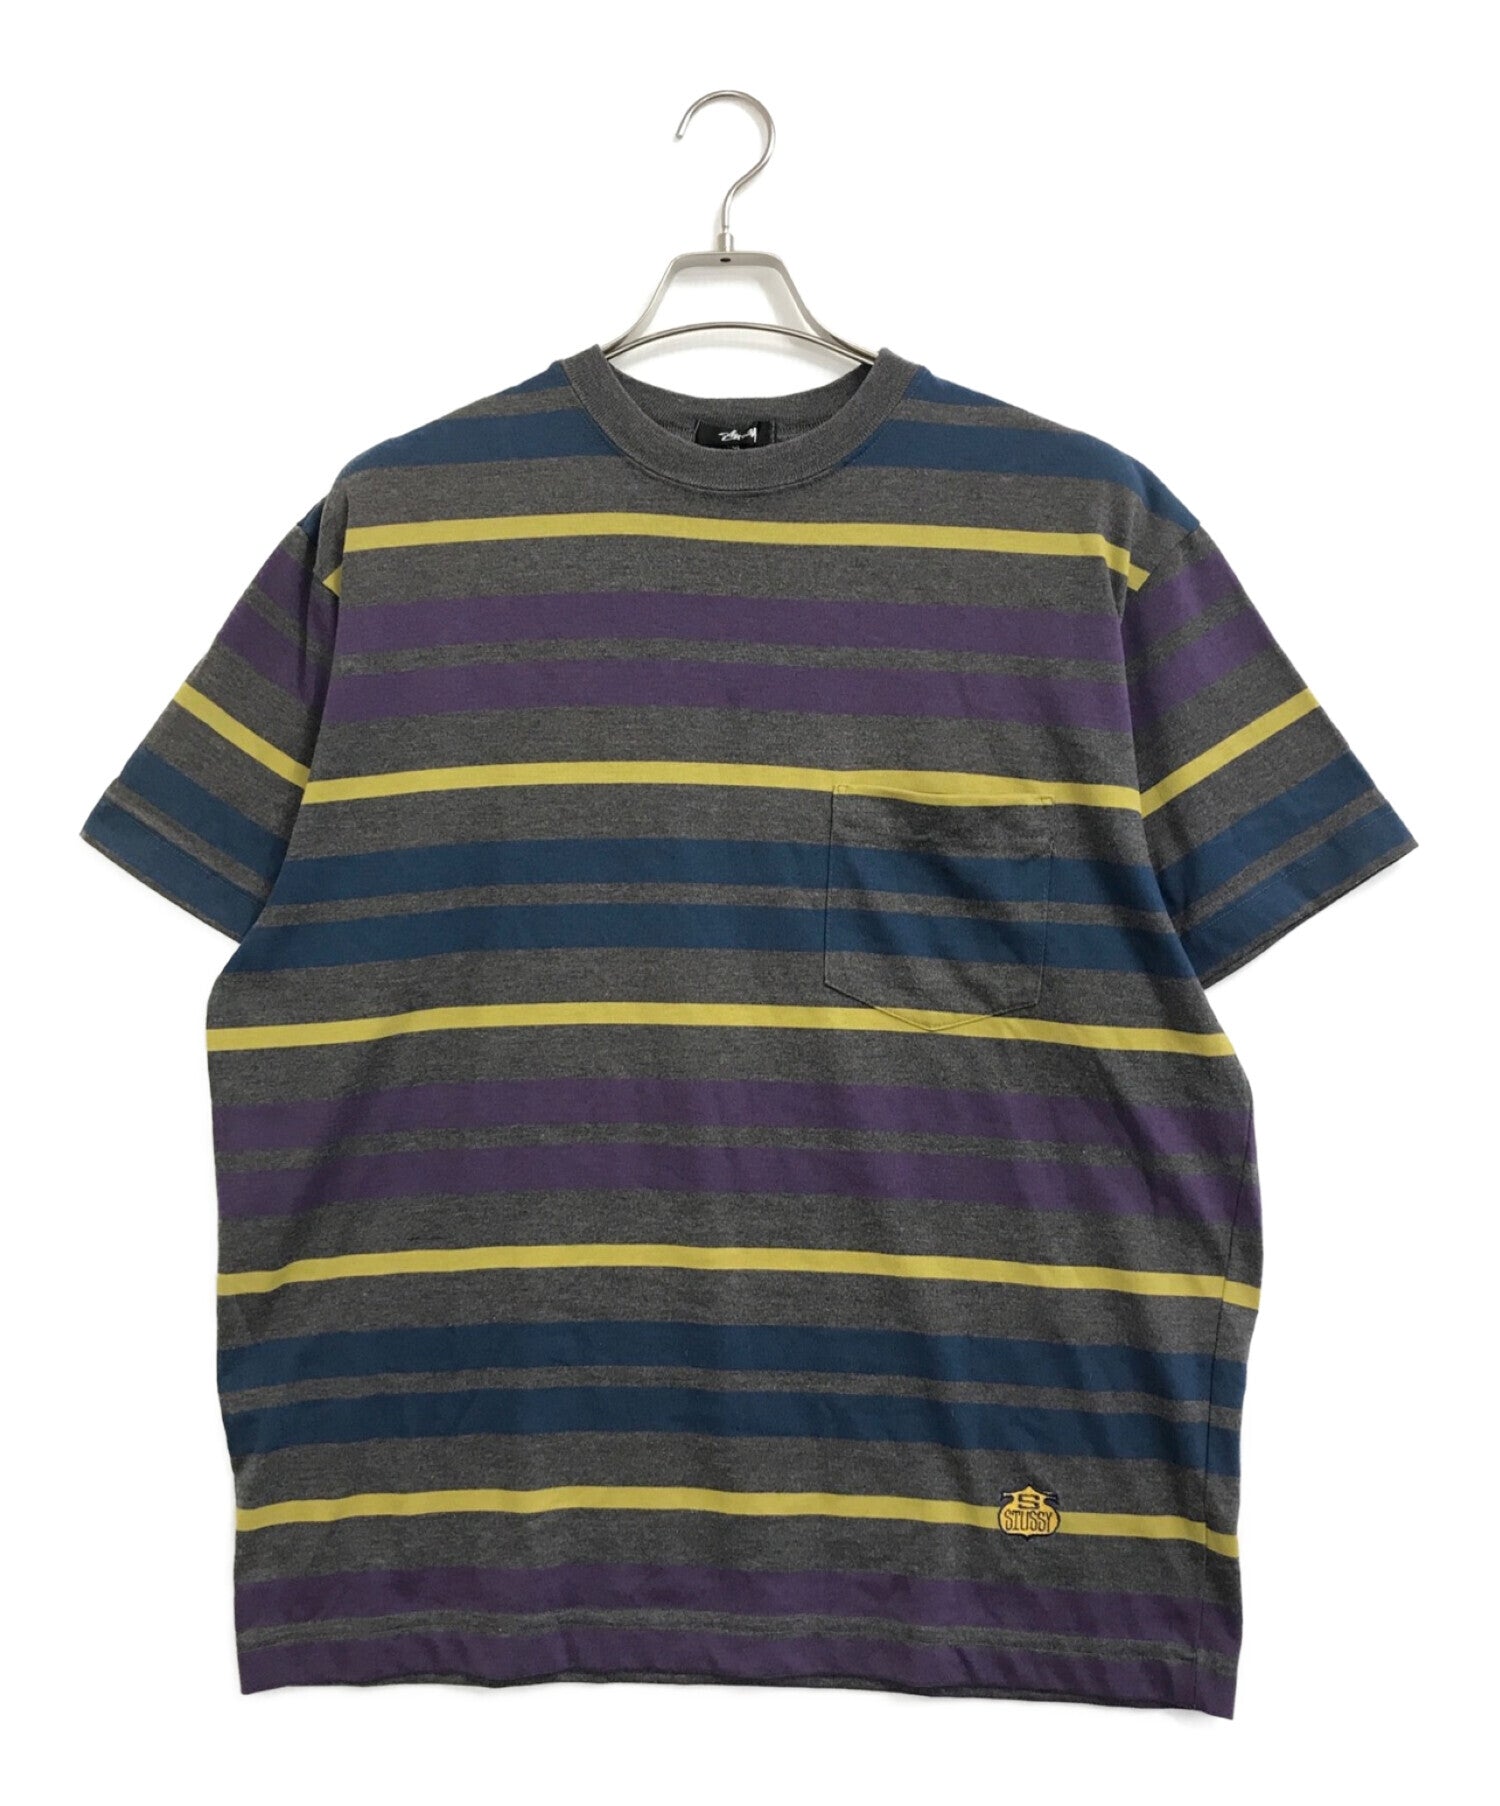 stussy 80s Striped Cut & Sewn | Archive Factory